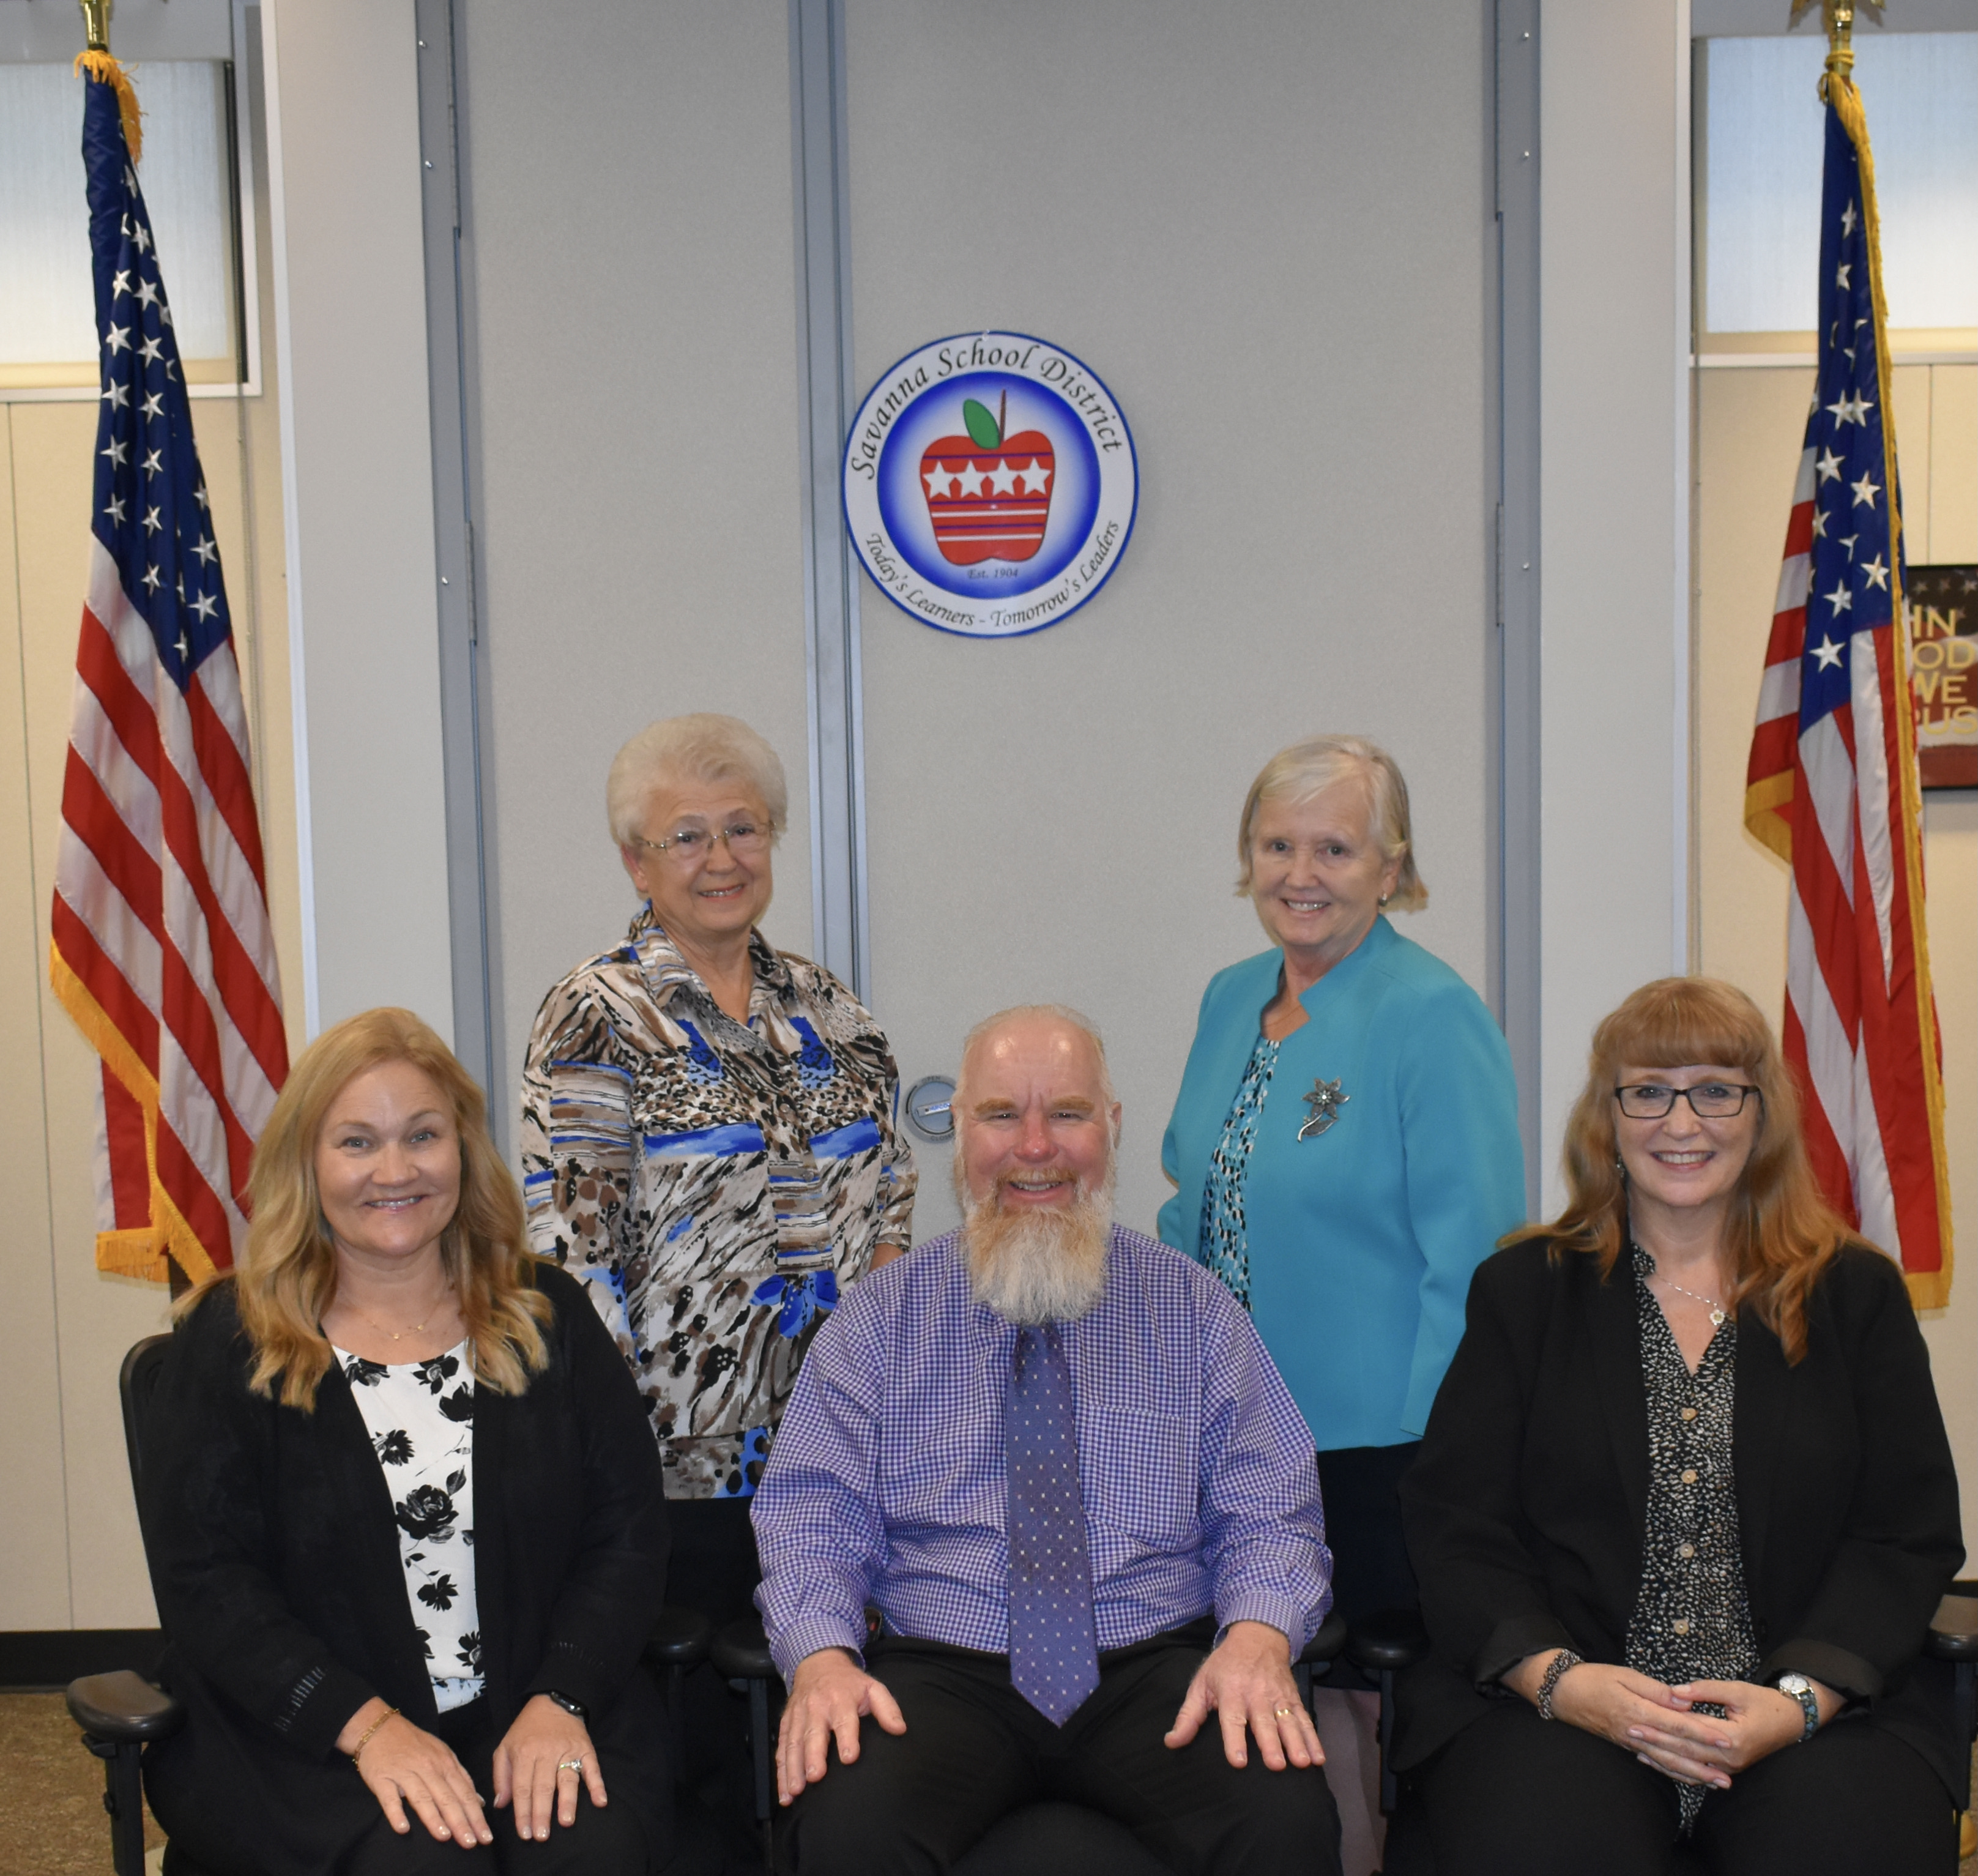 Board Members and Superintendent